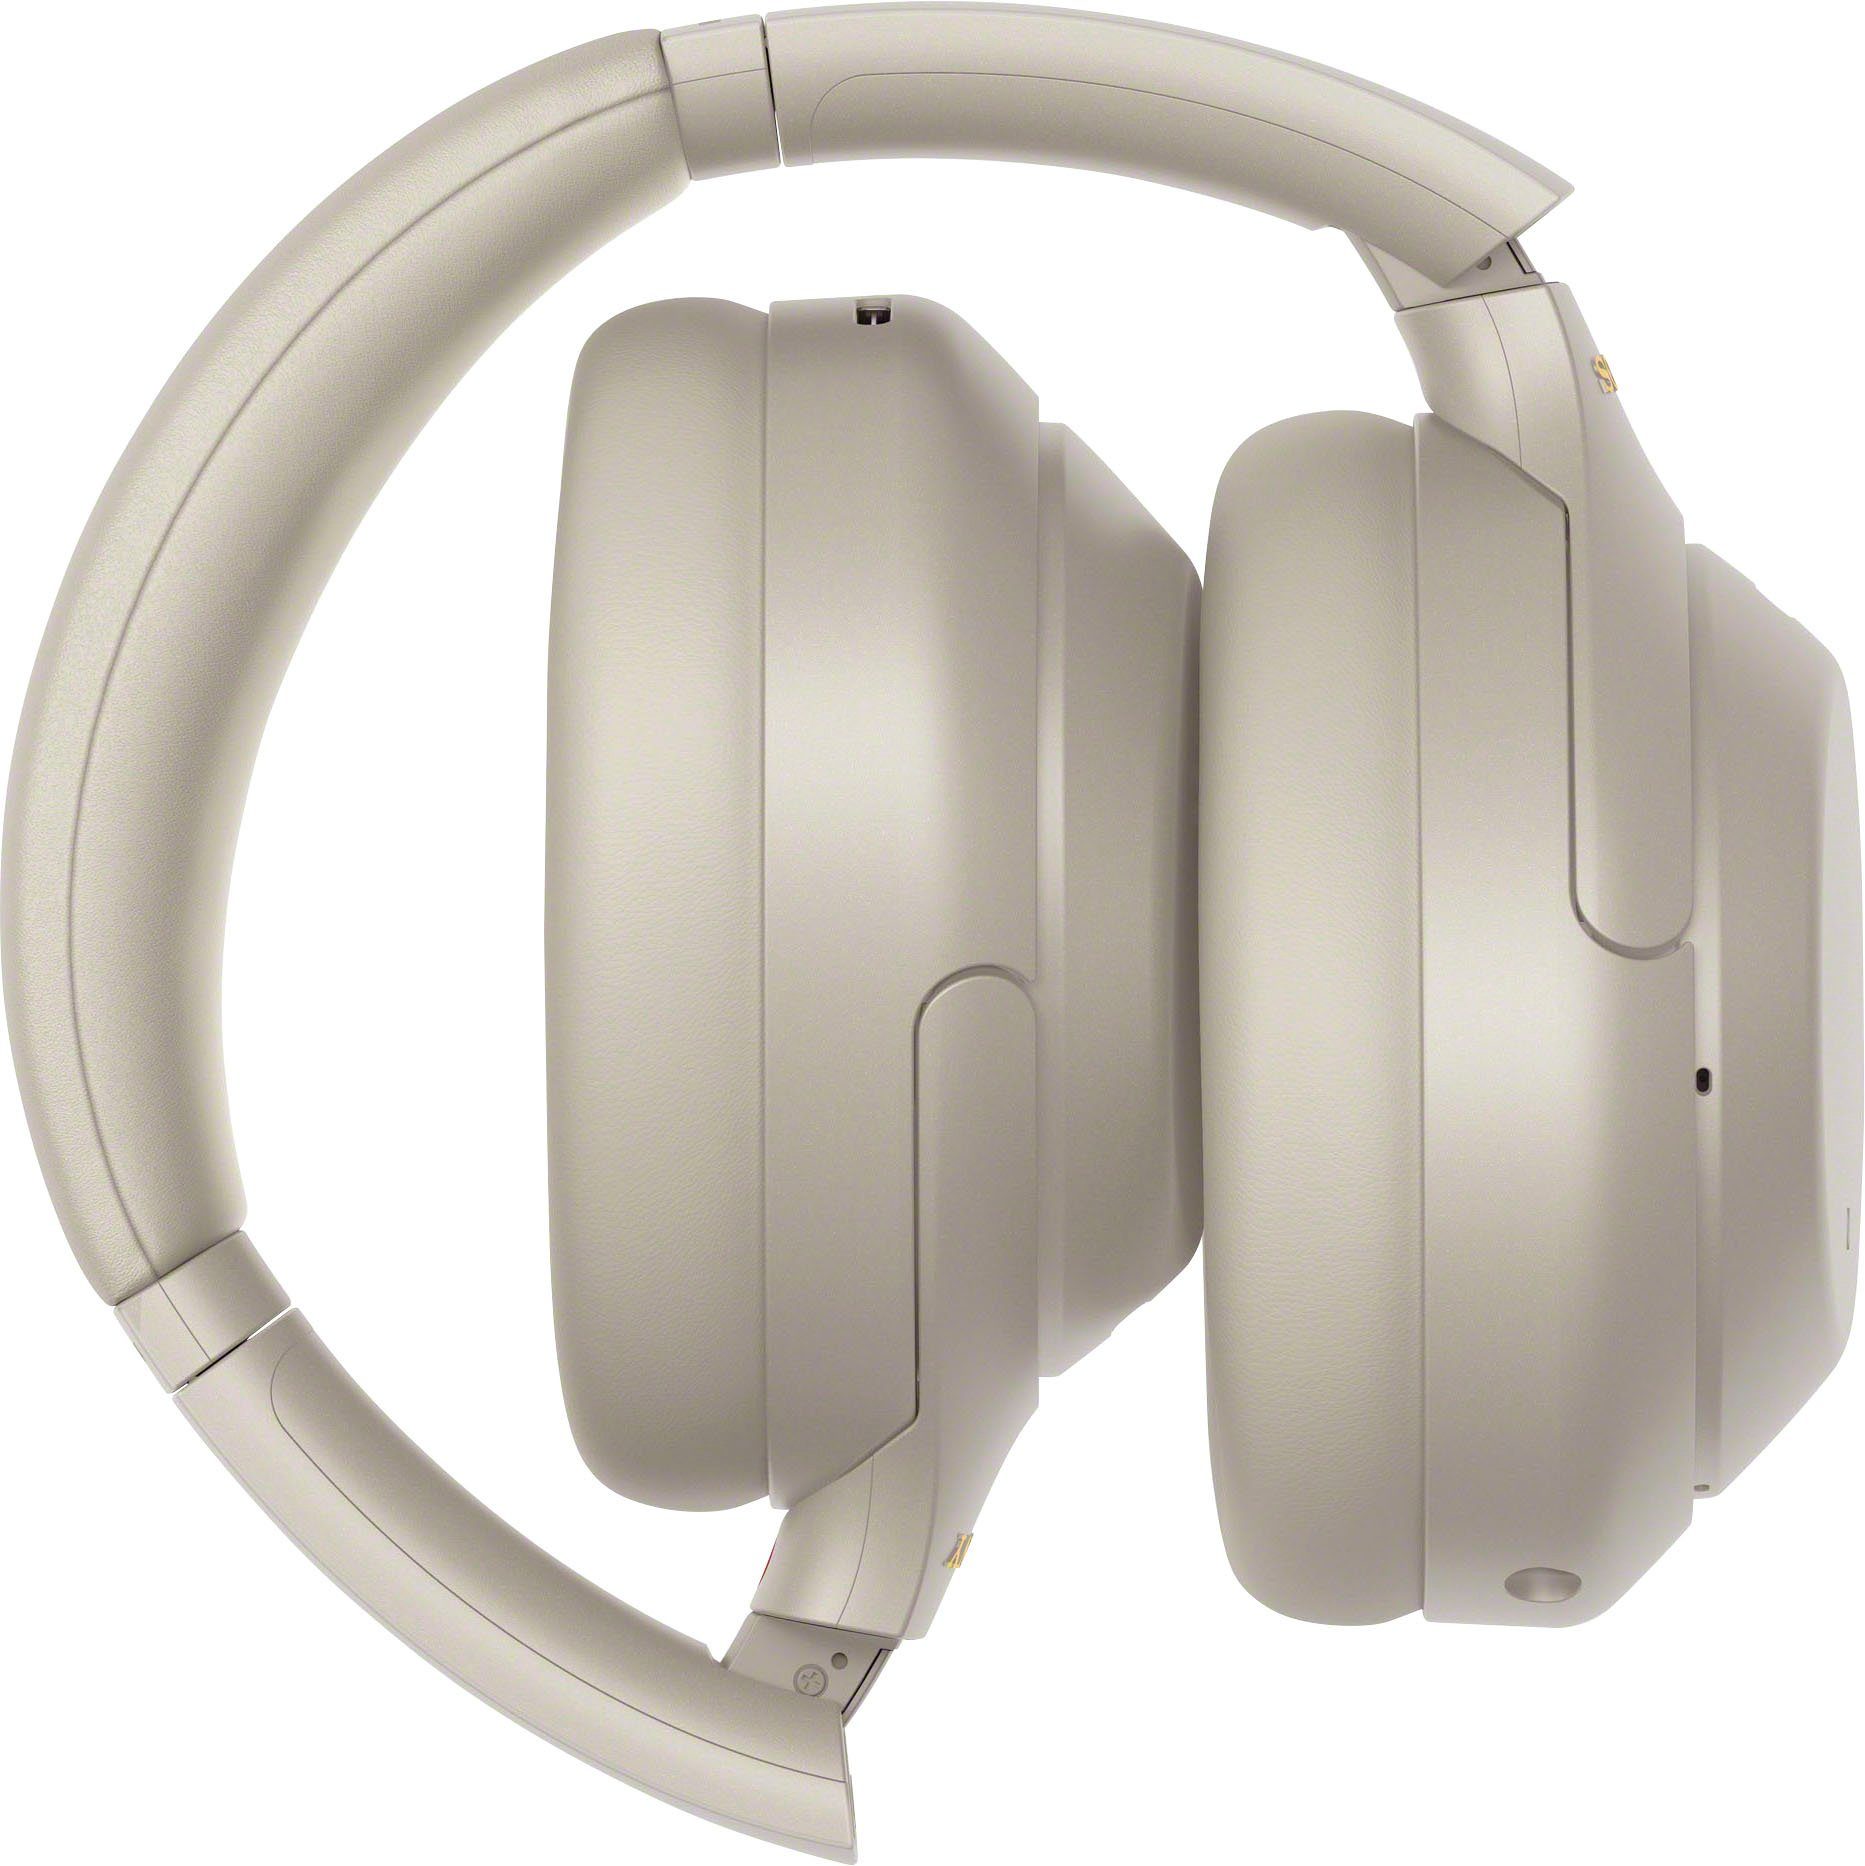 Sony WH-1000XM4 kabelloser Over-Ear-Kopfhörer (Noise-Cancelling, Schnellladefunktion) Sensor, NFC, One-Touch Touch NFC, Bluetooth, Silber Verbindung via